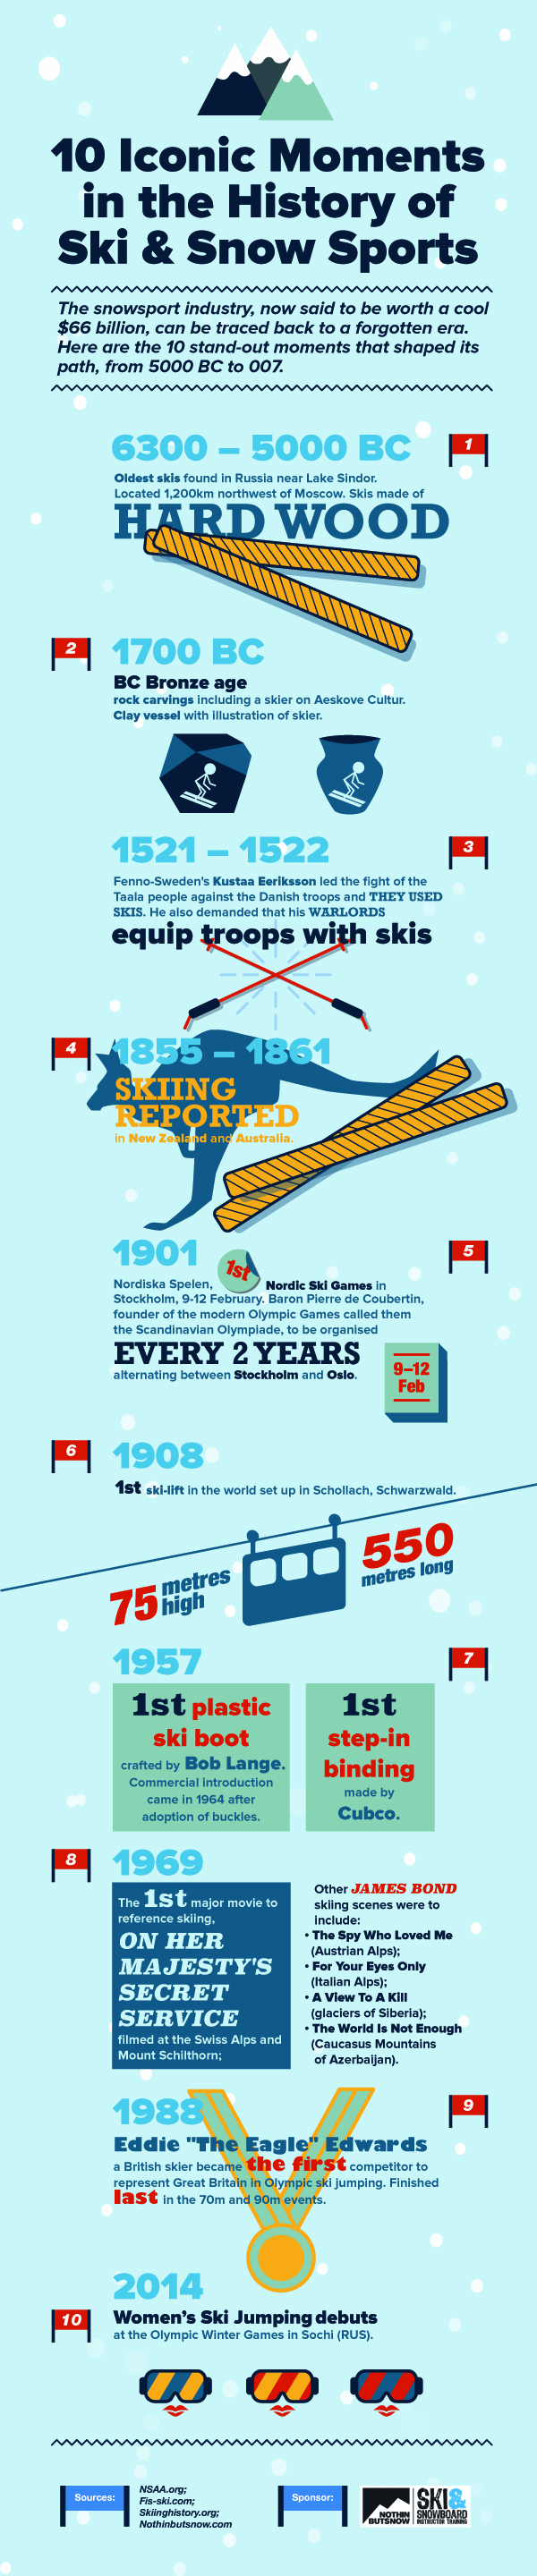 10 Iconic Moments in the History of Ski and Snow